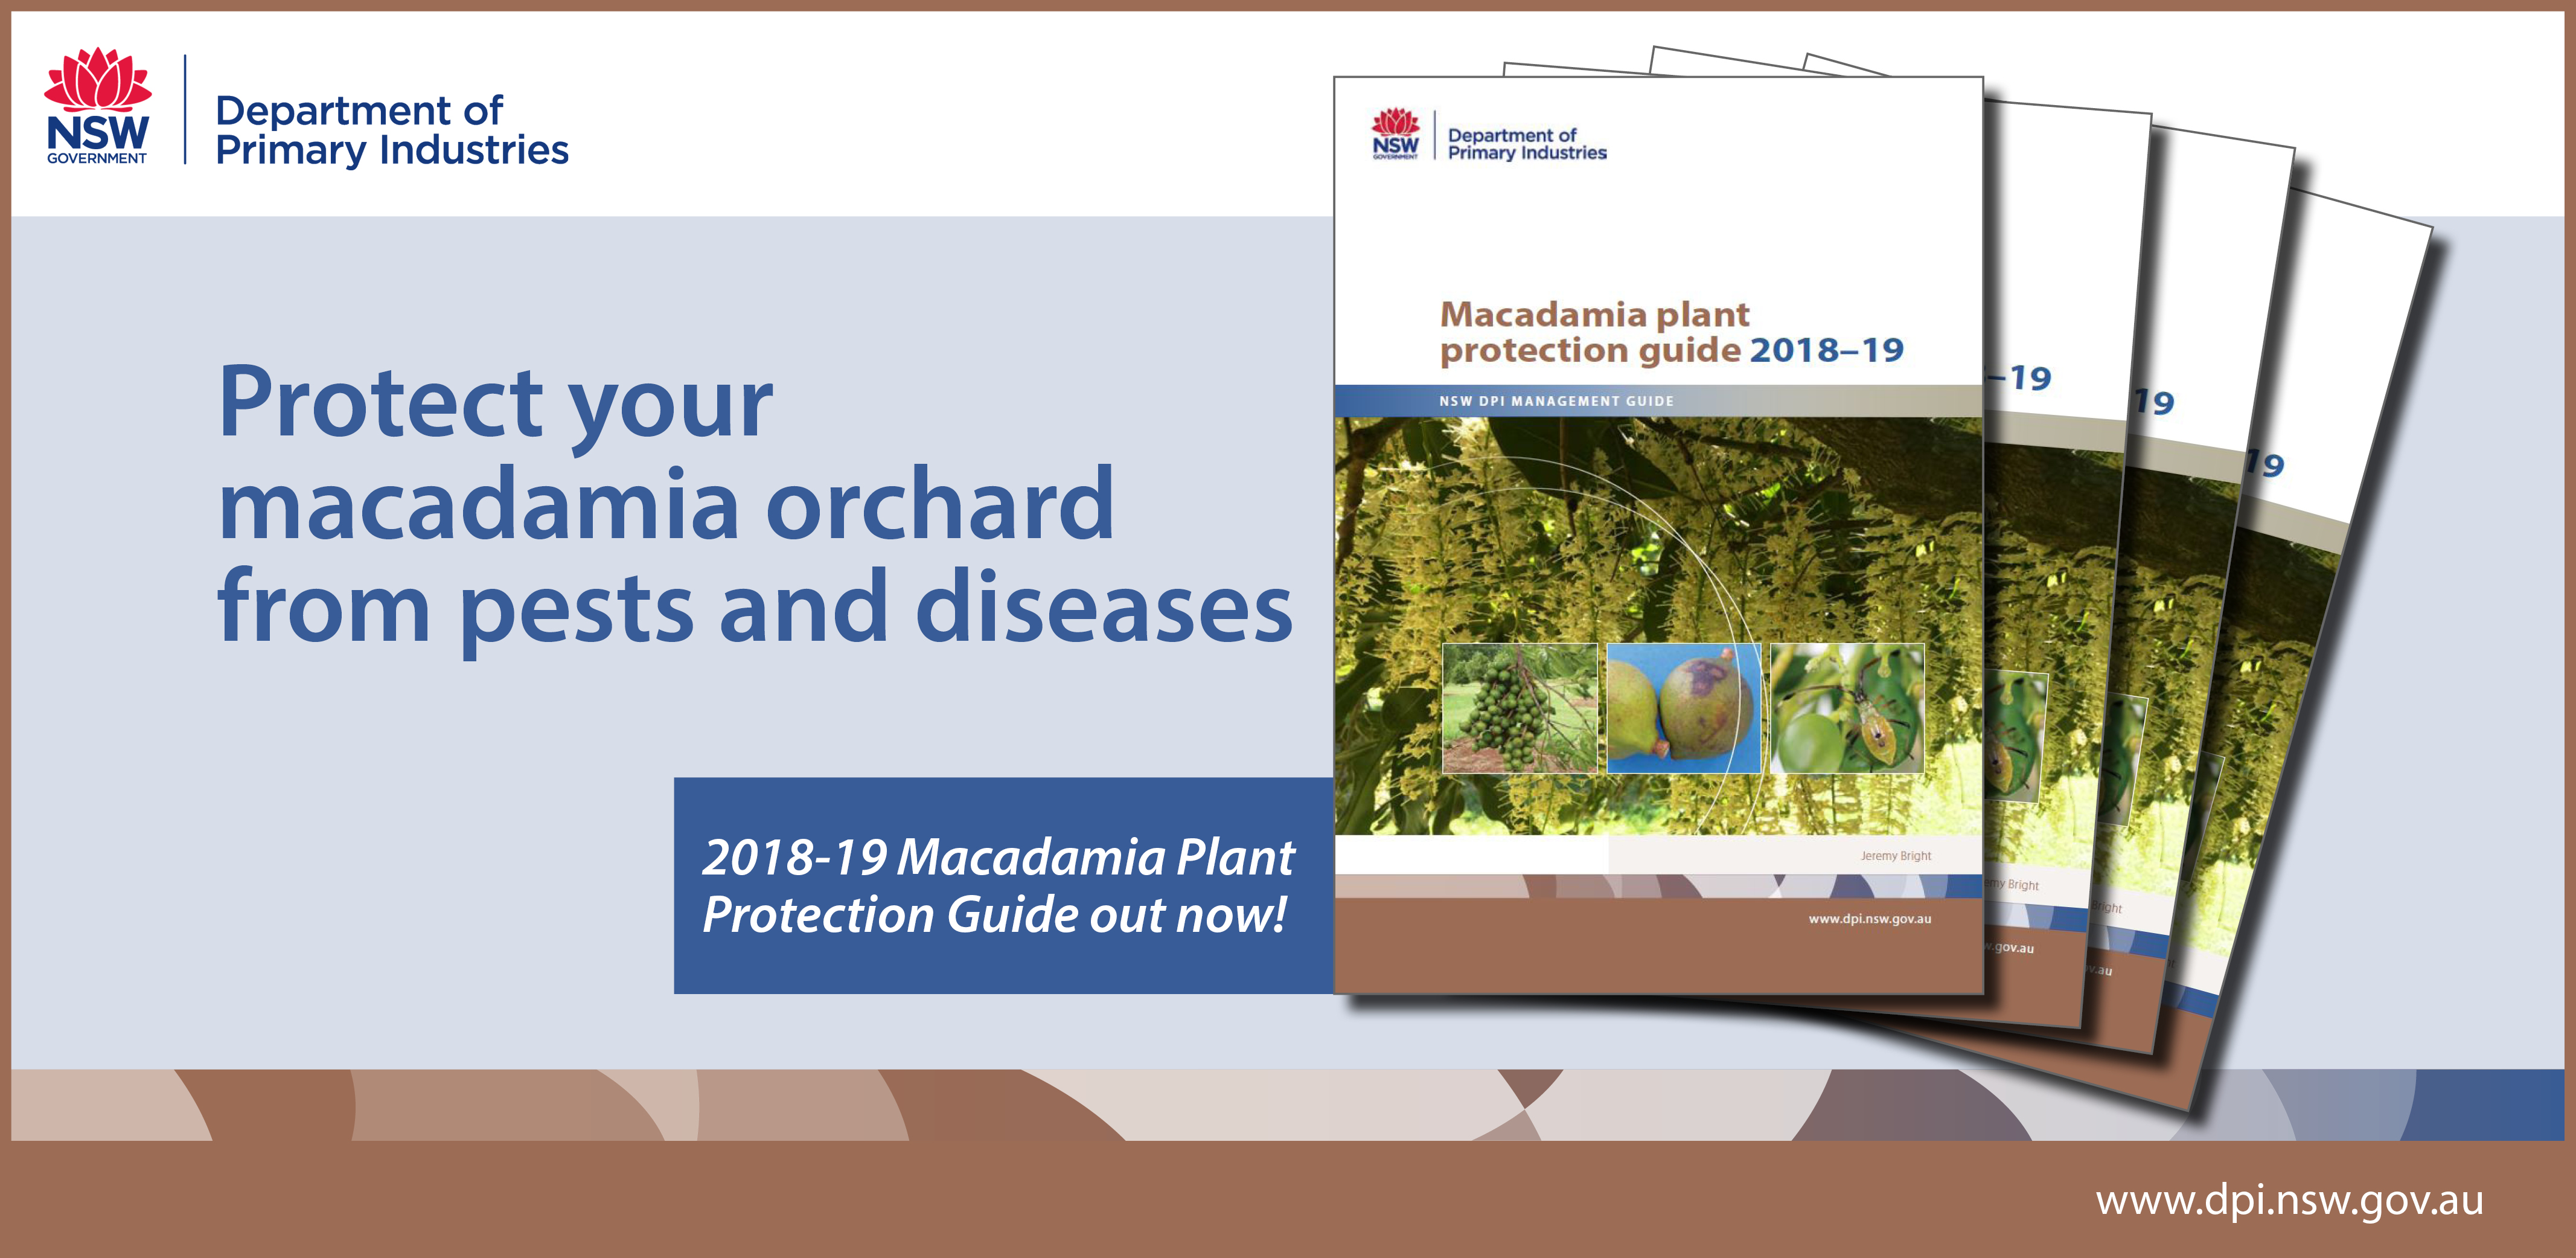 2018-19 Macadamia Plant Protection Guide out now! Protect your macadamia orchard from pests and diseases.